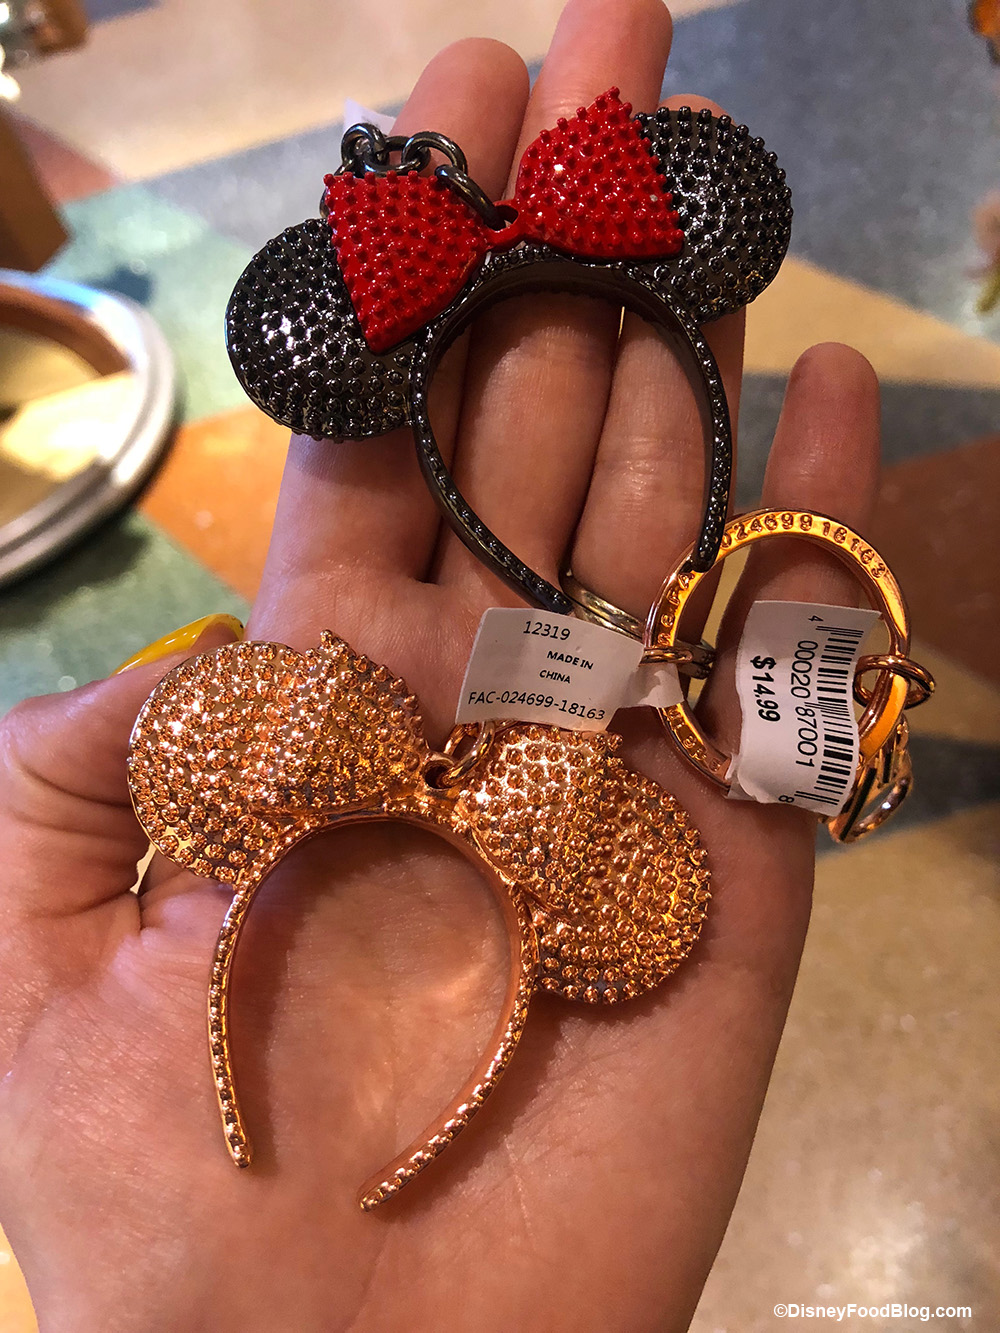 Mickey Mouse, Vintage Mickey Keychain